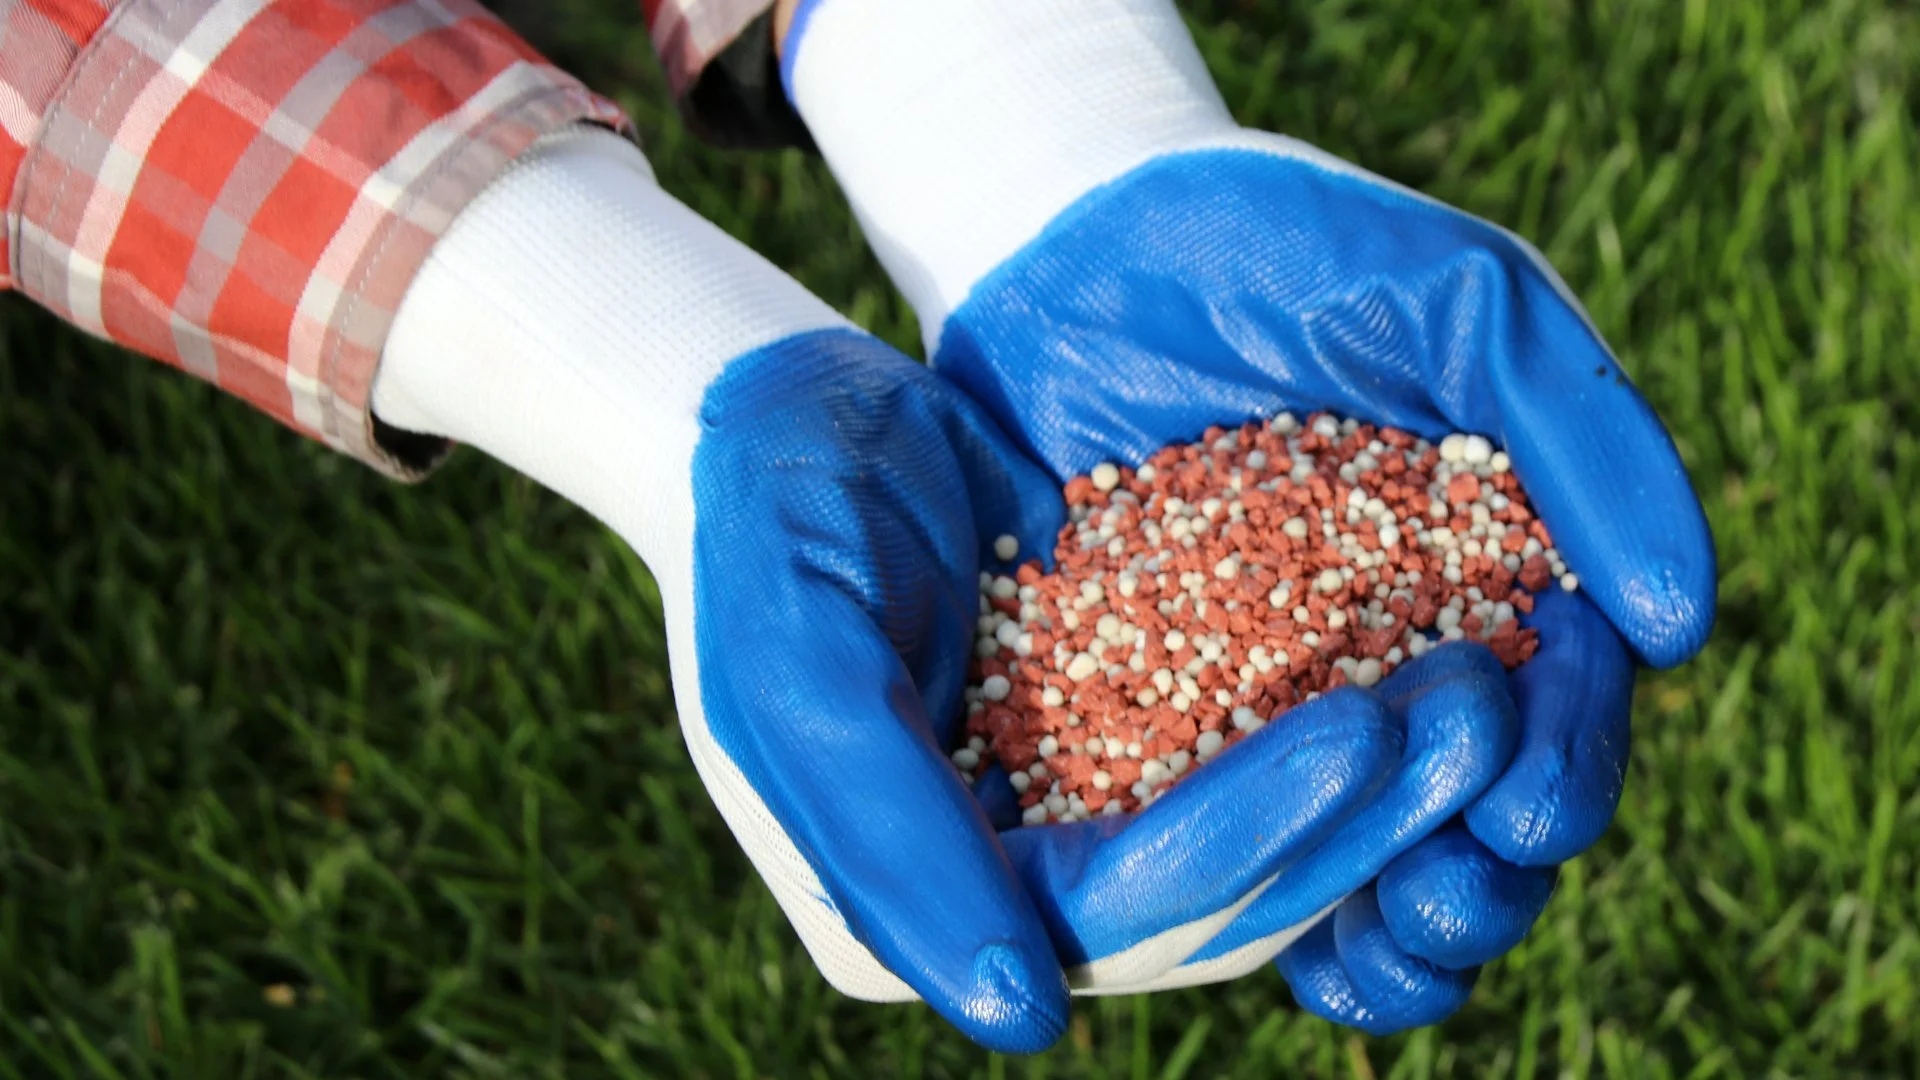 Is It Possible to Fertilize Your Lawn Too Late Into the Fall Season?